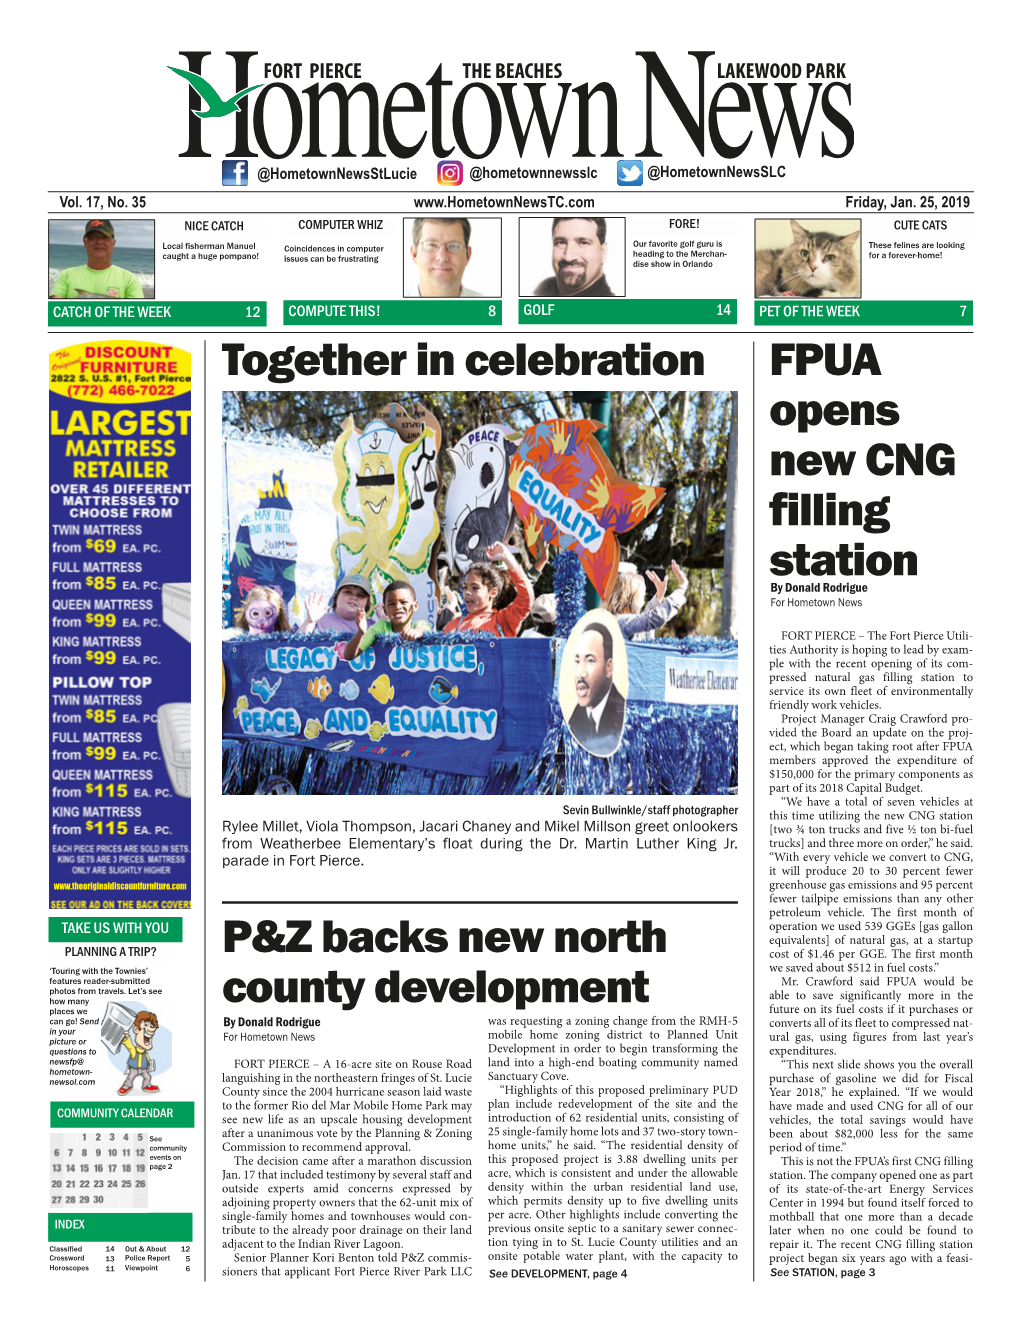 Together in Celebration P&Z Backs New North County Development FPUA Opens New CNG Filling Station